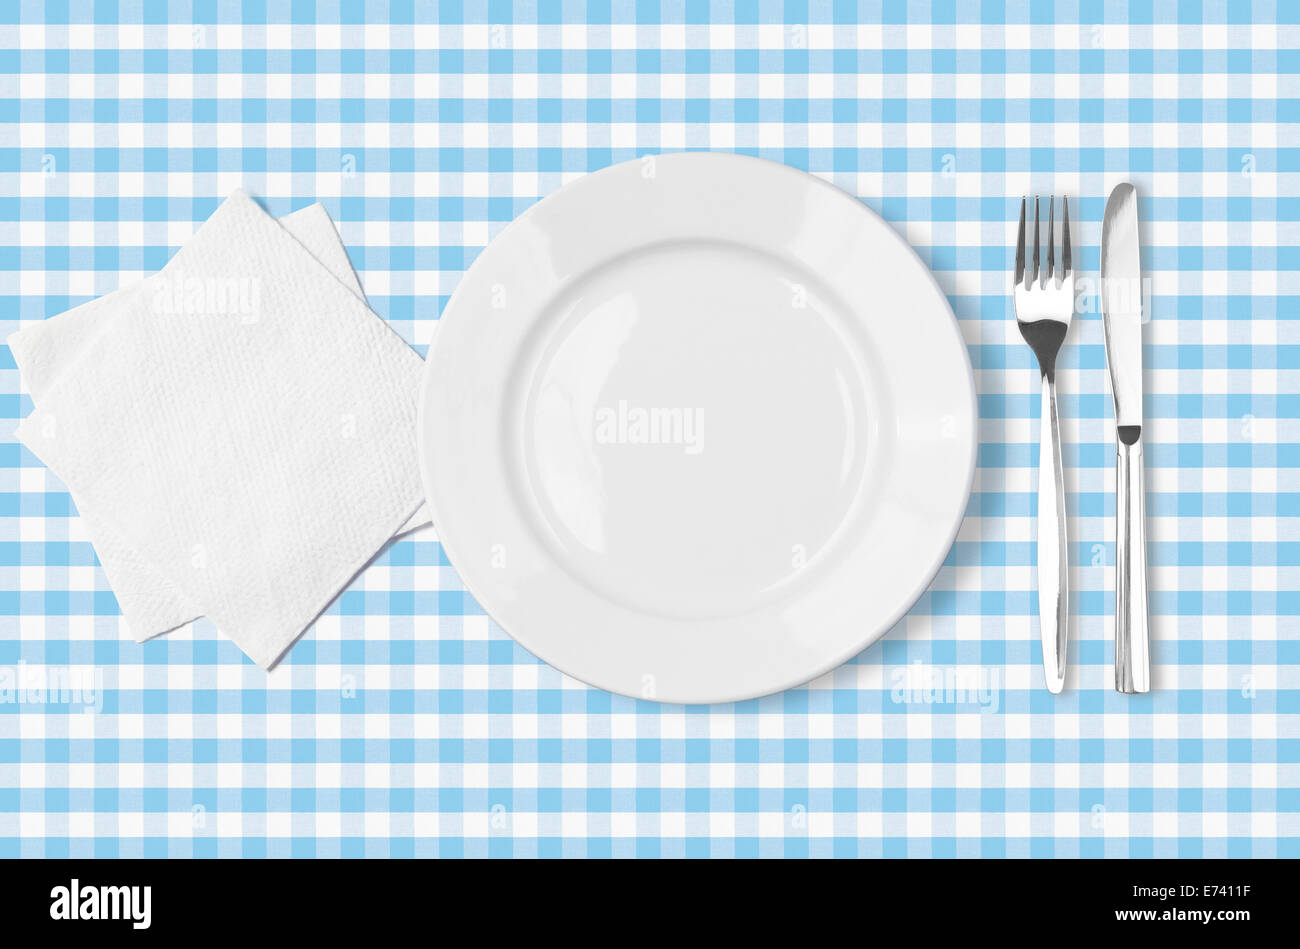 plate, fork, knife and napkin over blue checked fabric tablecloth top view Stock Photo